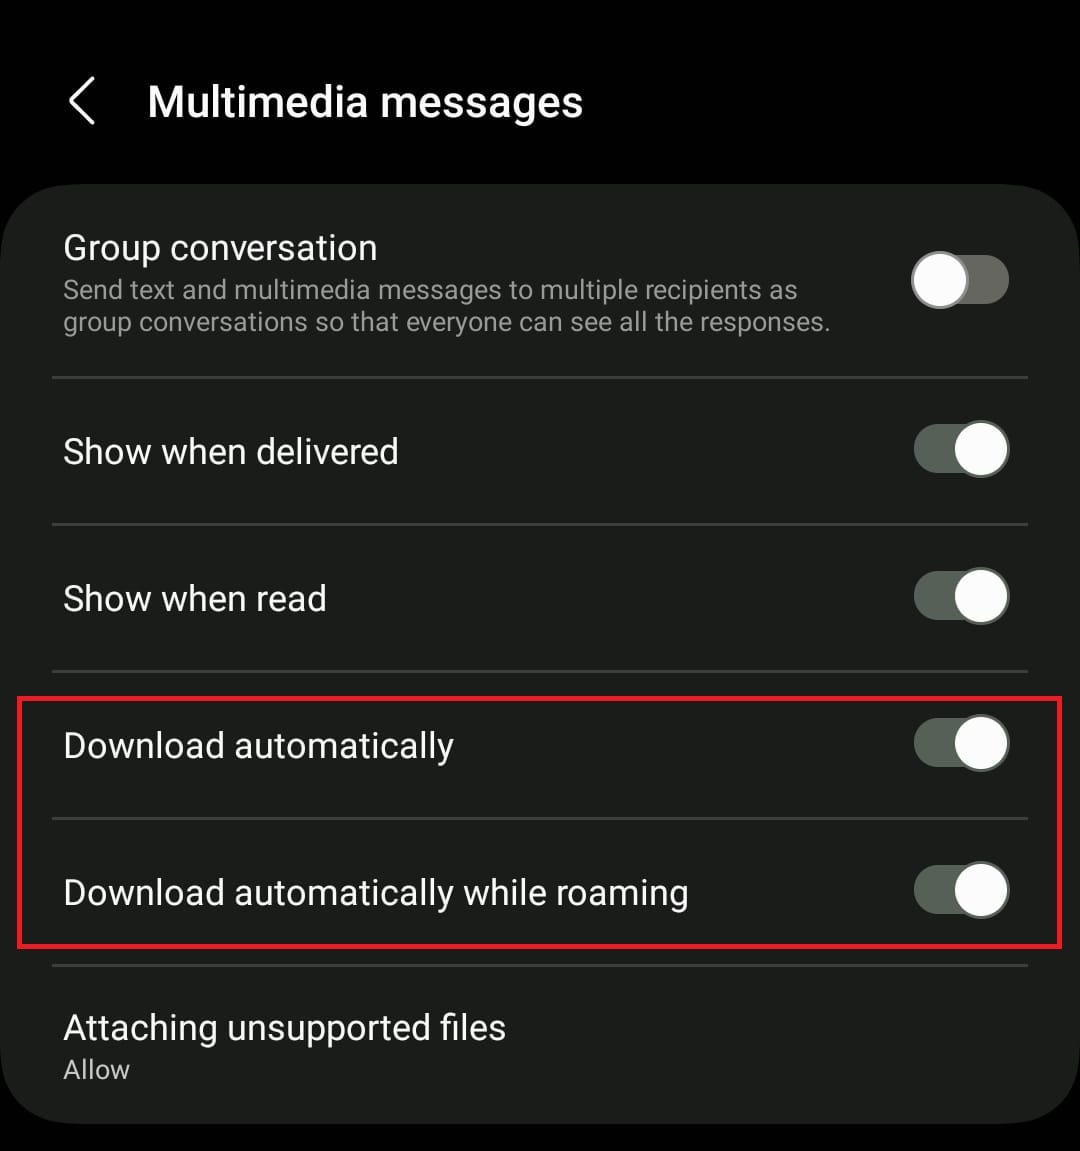 Turn the toggle on for Download automatically and Download automatically while roaming